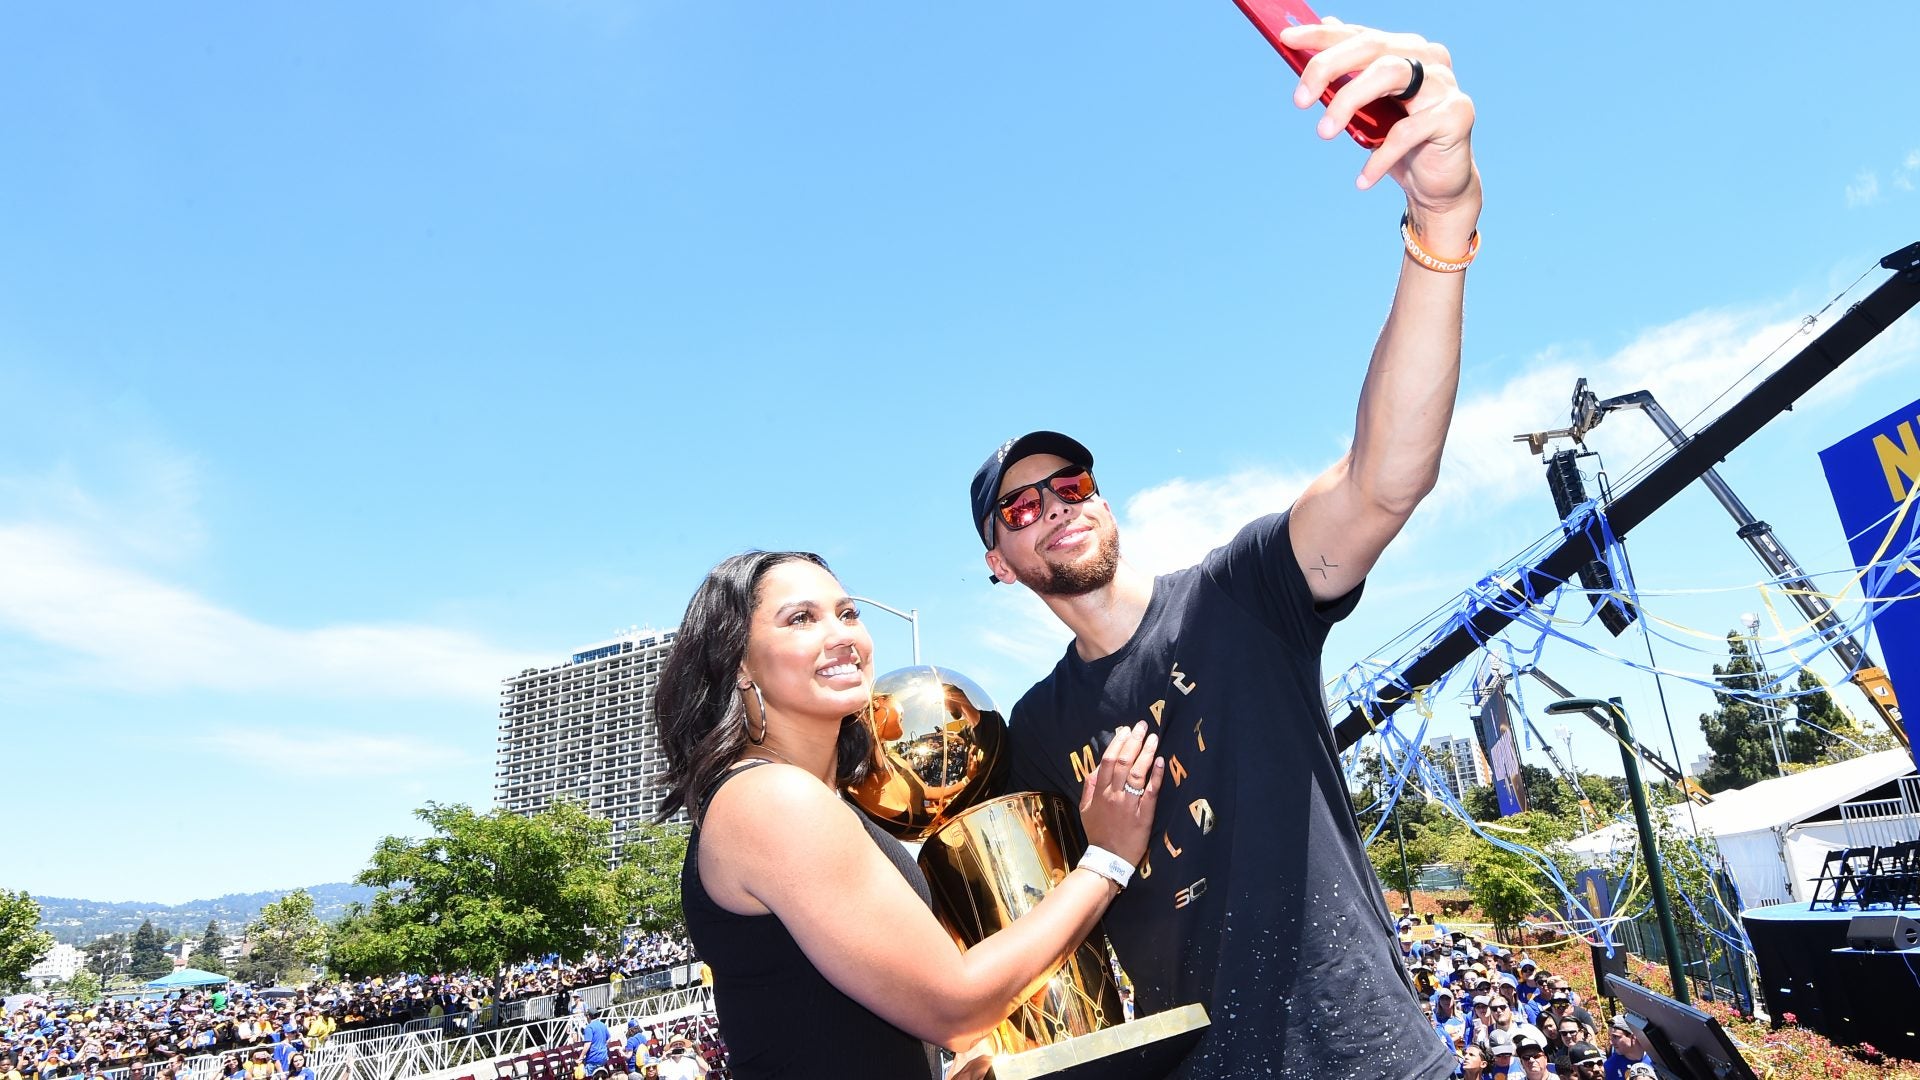 From Teenage Sweethearts To Forever Love: Steph and Ayesha Curry's Love Story